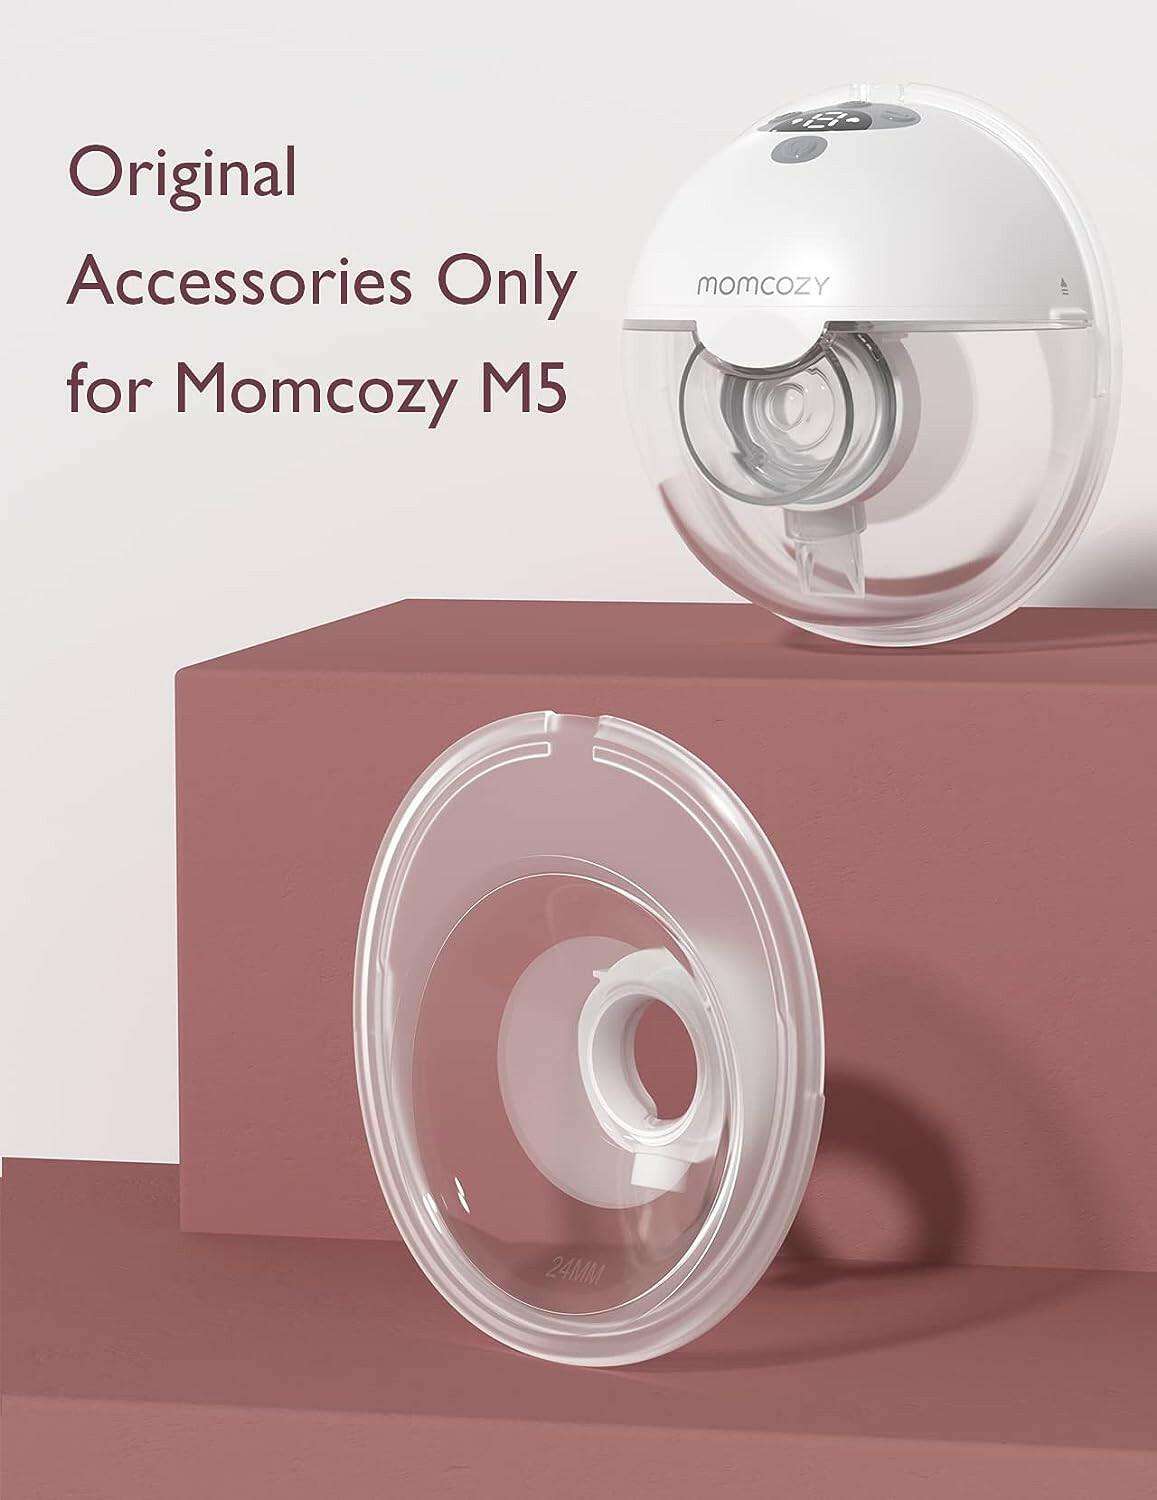 Momcozy Double-Sealed Flange Compatible with Momcozy M5.